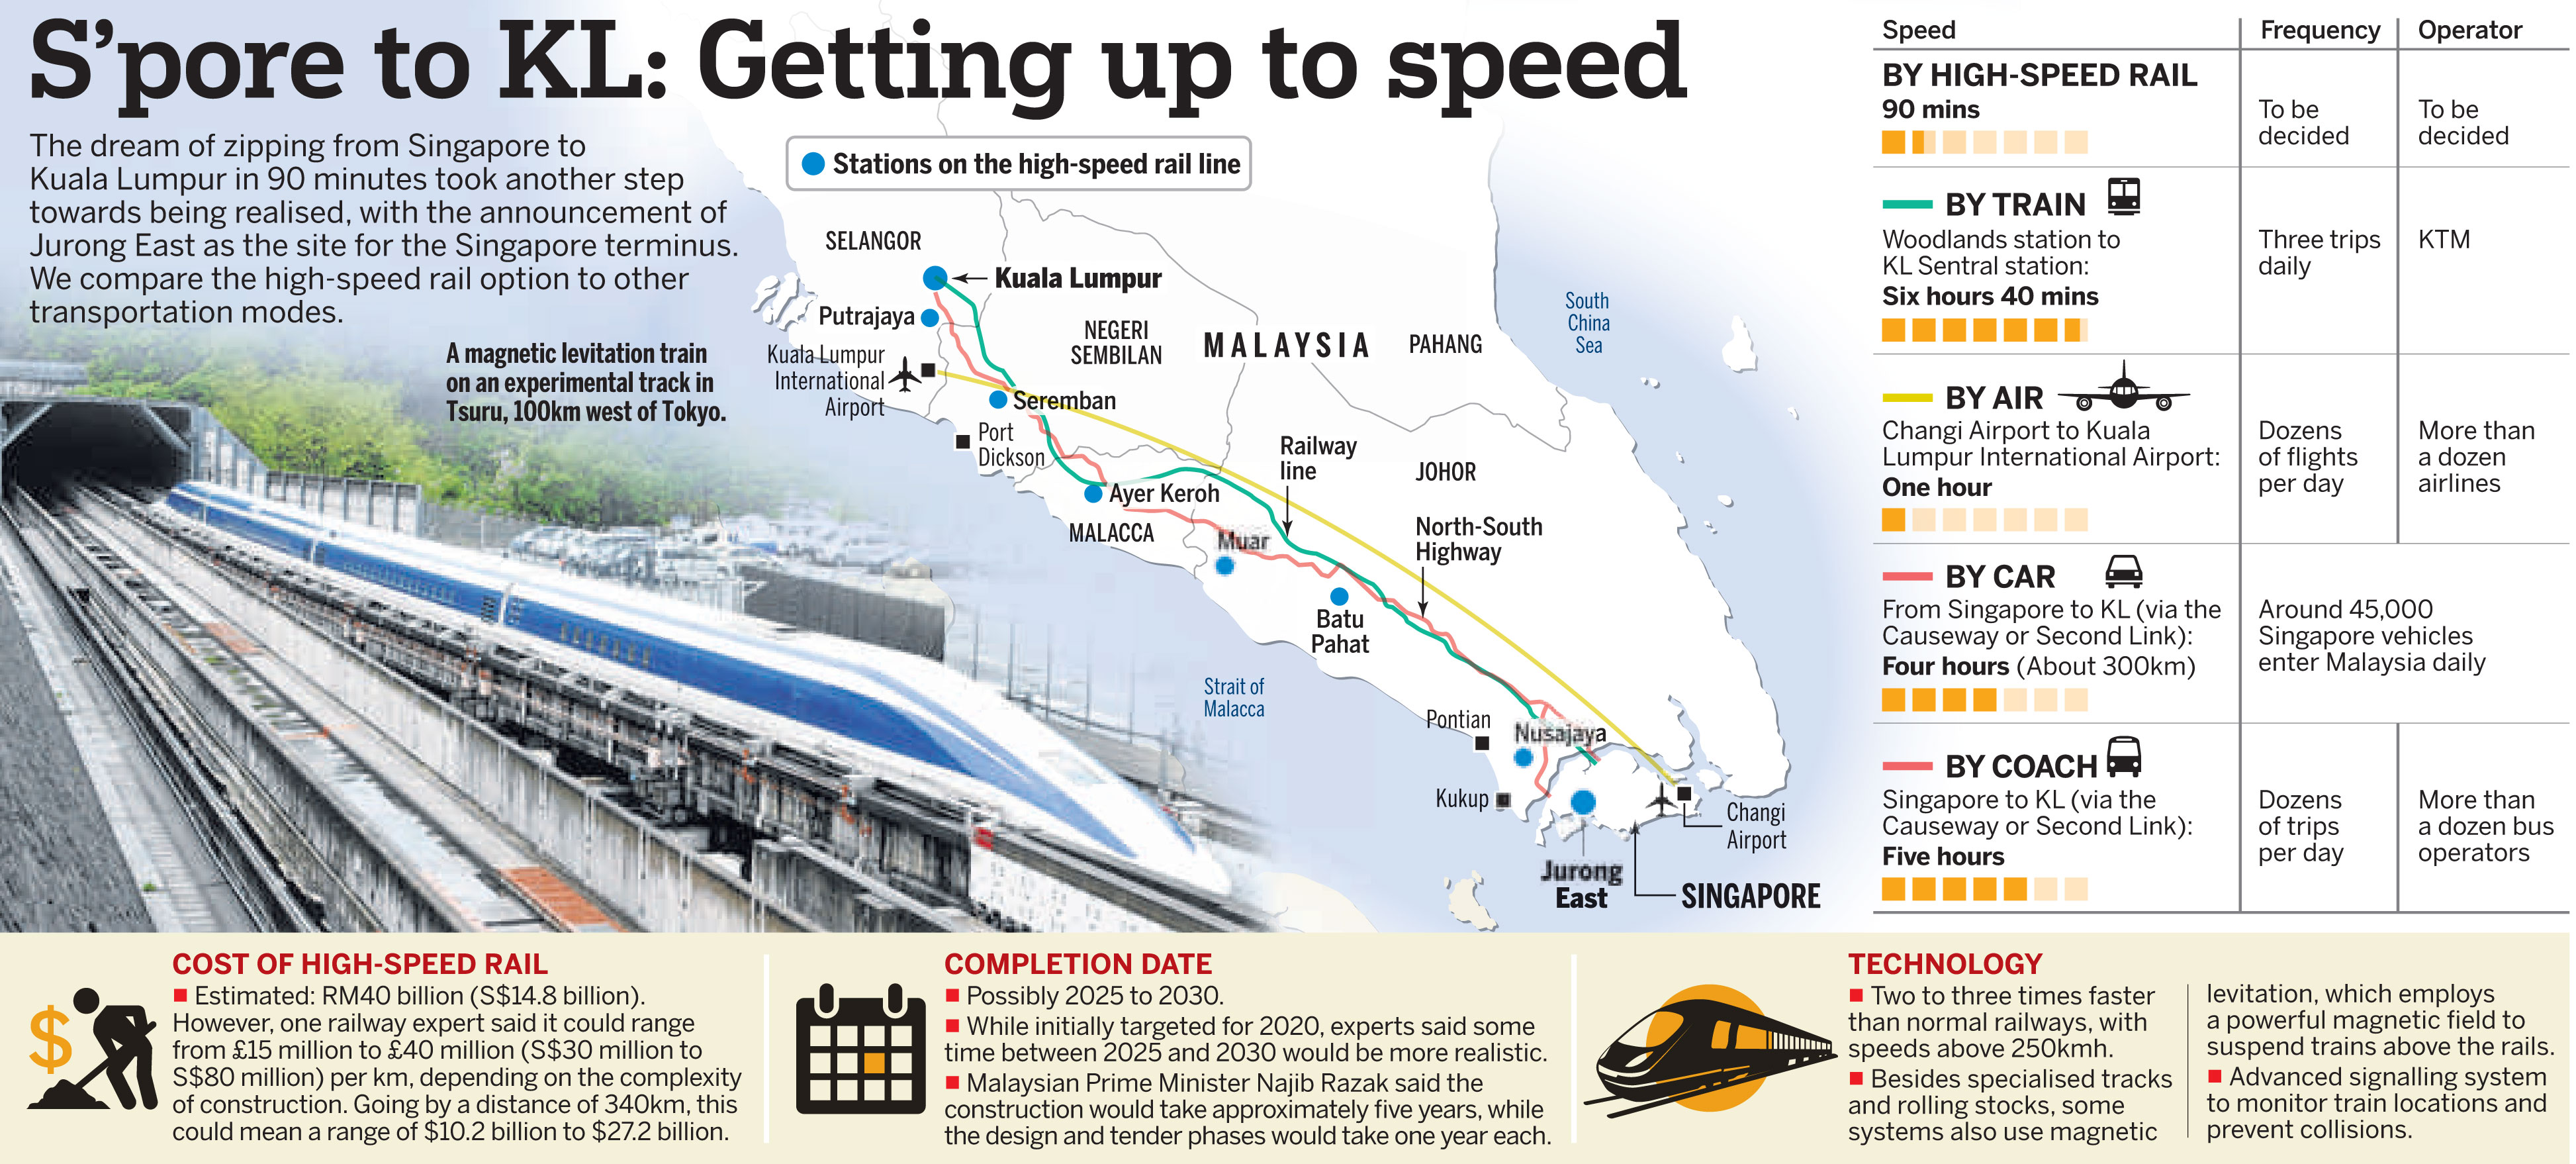 Golf club to make way for high-speed rail terminus, AsiaOne.